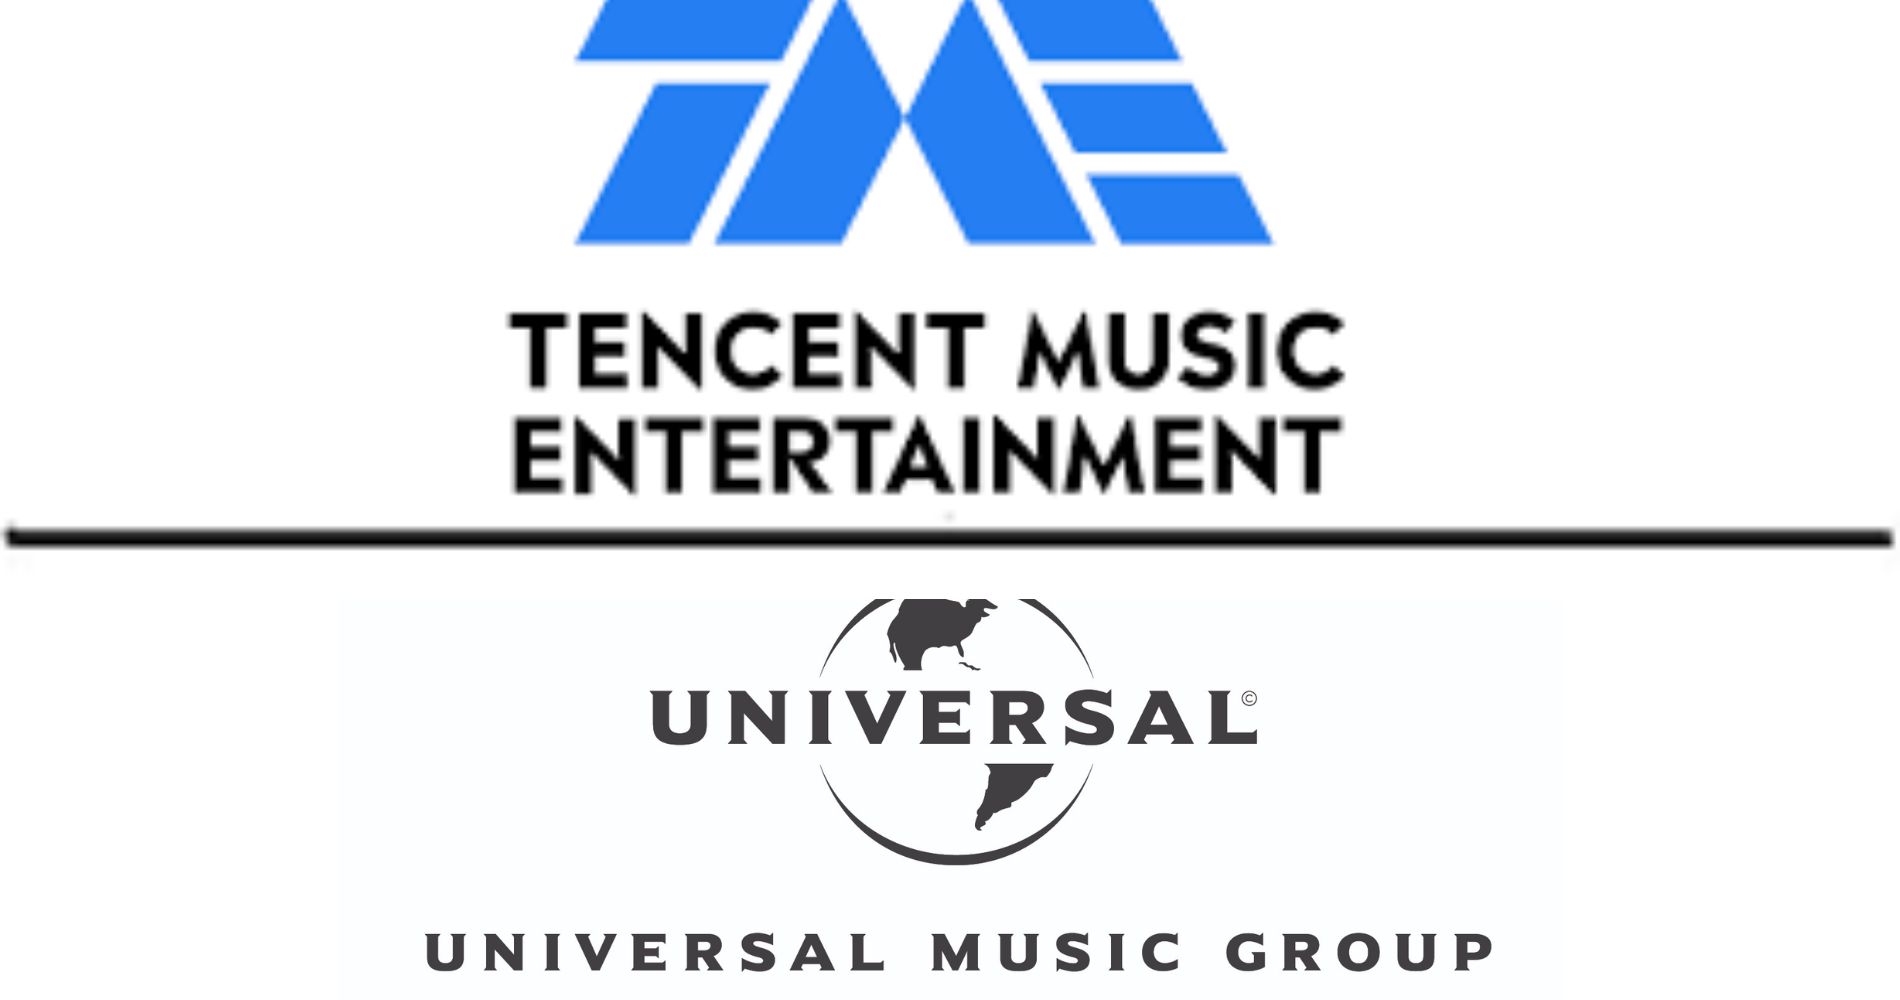 Tencent Music And Universal Music Group Solidify Partnership With Renewed Multi-Year Licensing Deal